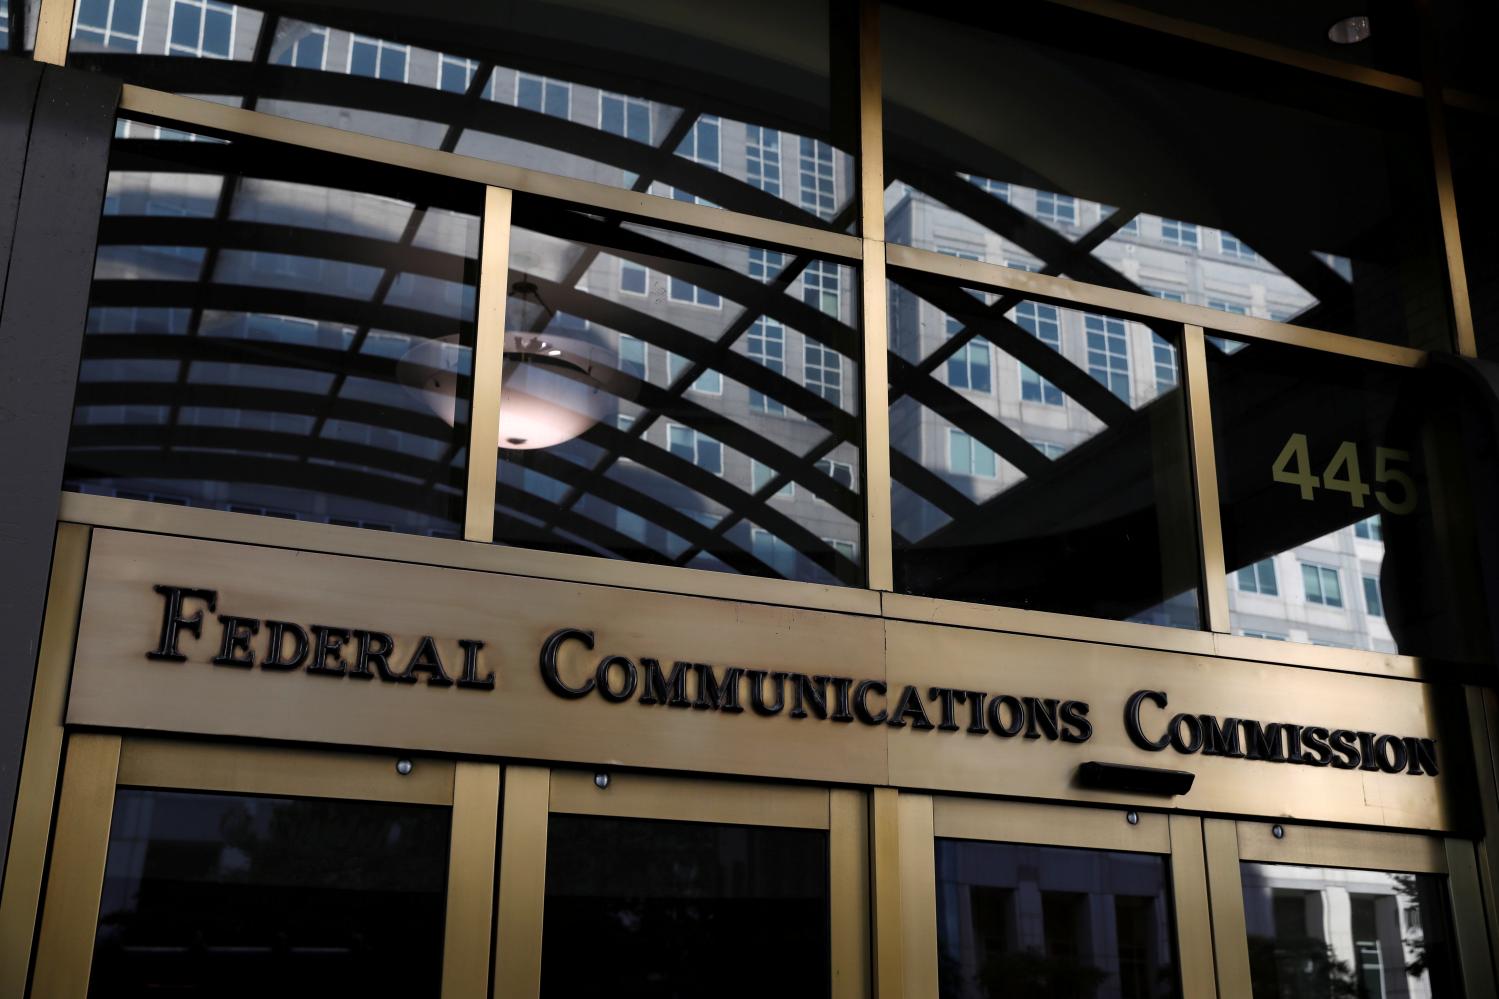 FILE PHOTO: FILE PHOTO: Signage is seen at the headquarters of the Federal Communications Commission in Washington, D.C., U.S., August 29, 2020. REUTERS/Andrew Kelly/File Photo